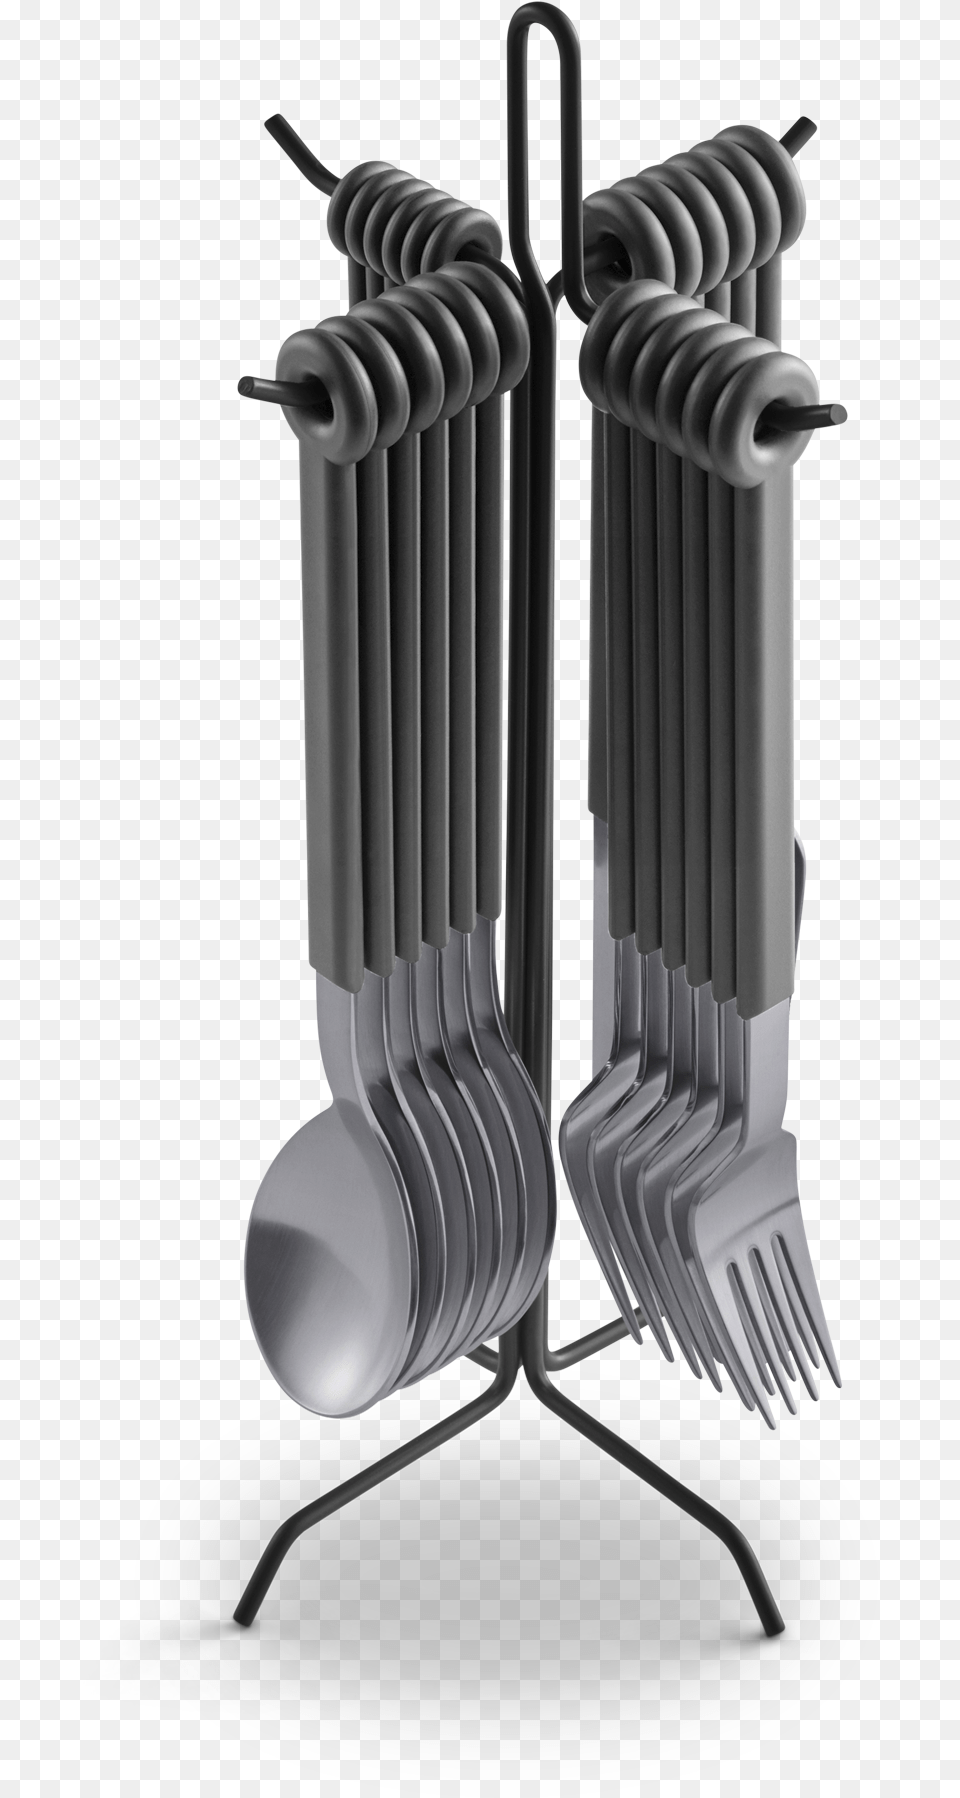 Mono Ring Flatware Set 24 Stand Grey Mono Ring Flatware Set Black With Stand, Cutlery, Fork, Spoon Free Png Download